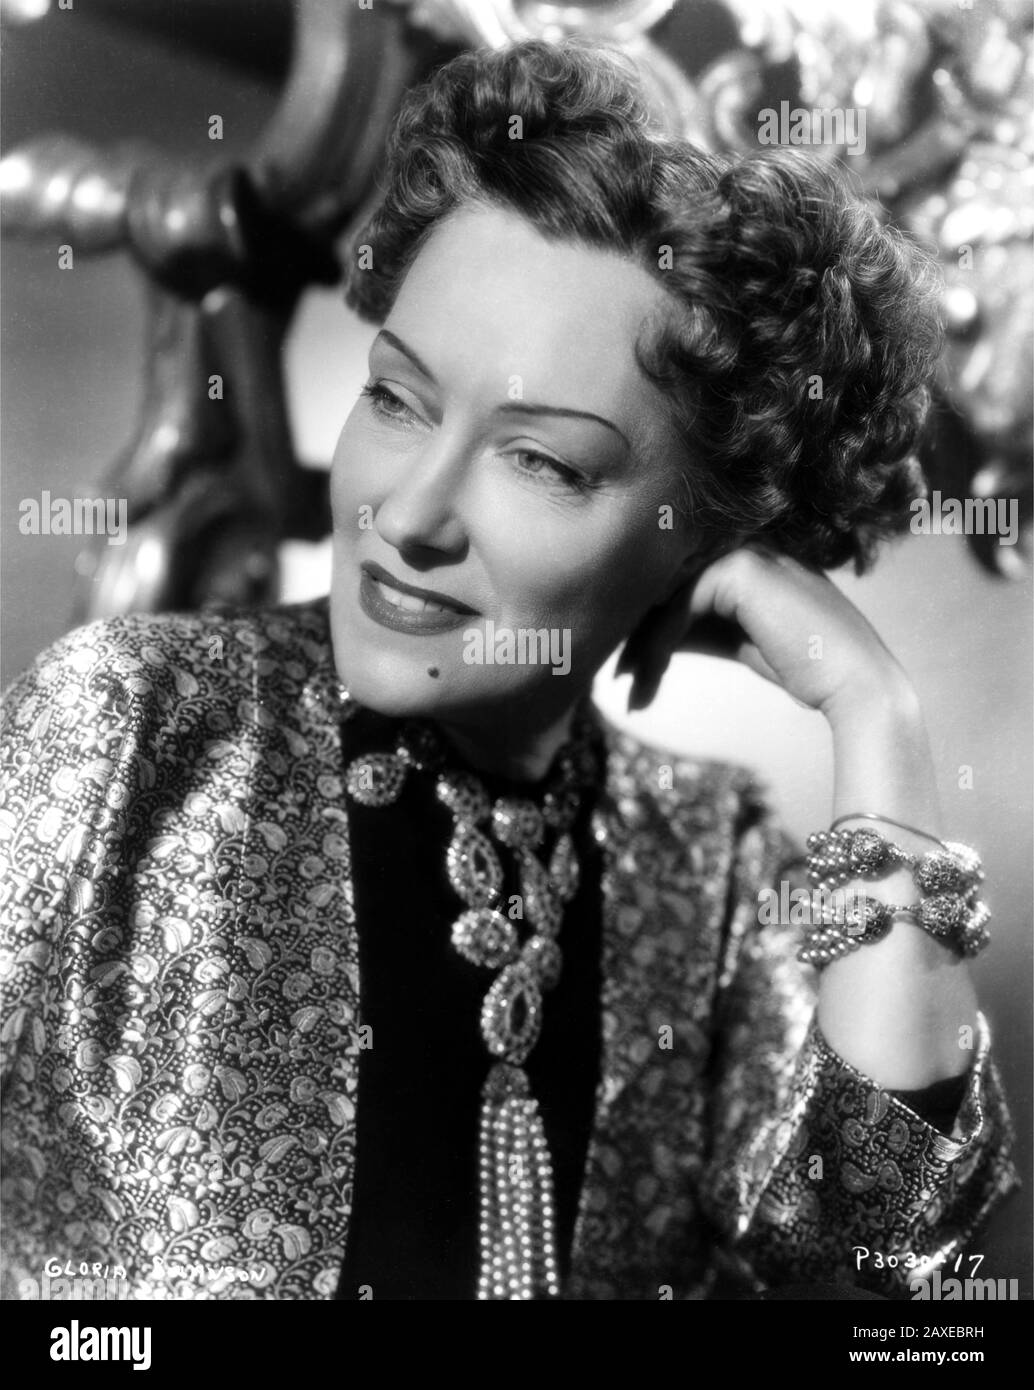 1951 : The movie actress GLORIA SWANSON ( Chicago 1898 - New York 1983 ) as Norma Desmond in SUNSET BOULEVARD ( Viale del Tramonto ) by Billy Wilder, costume by Edith HEAD , Paramount pubblicity still - FILM - CINEMA - attrice cinematografica - VAMP -  DIVA - DIVINA - DIVINE - Hollywood on Hollywood - smile - sorriso - neo - mole - necklace - collana ----  Archivio GBB Stock Photo